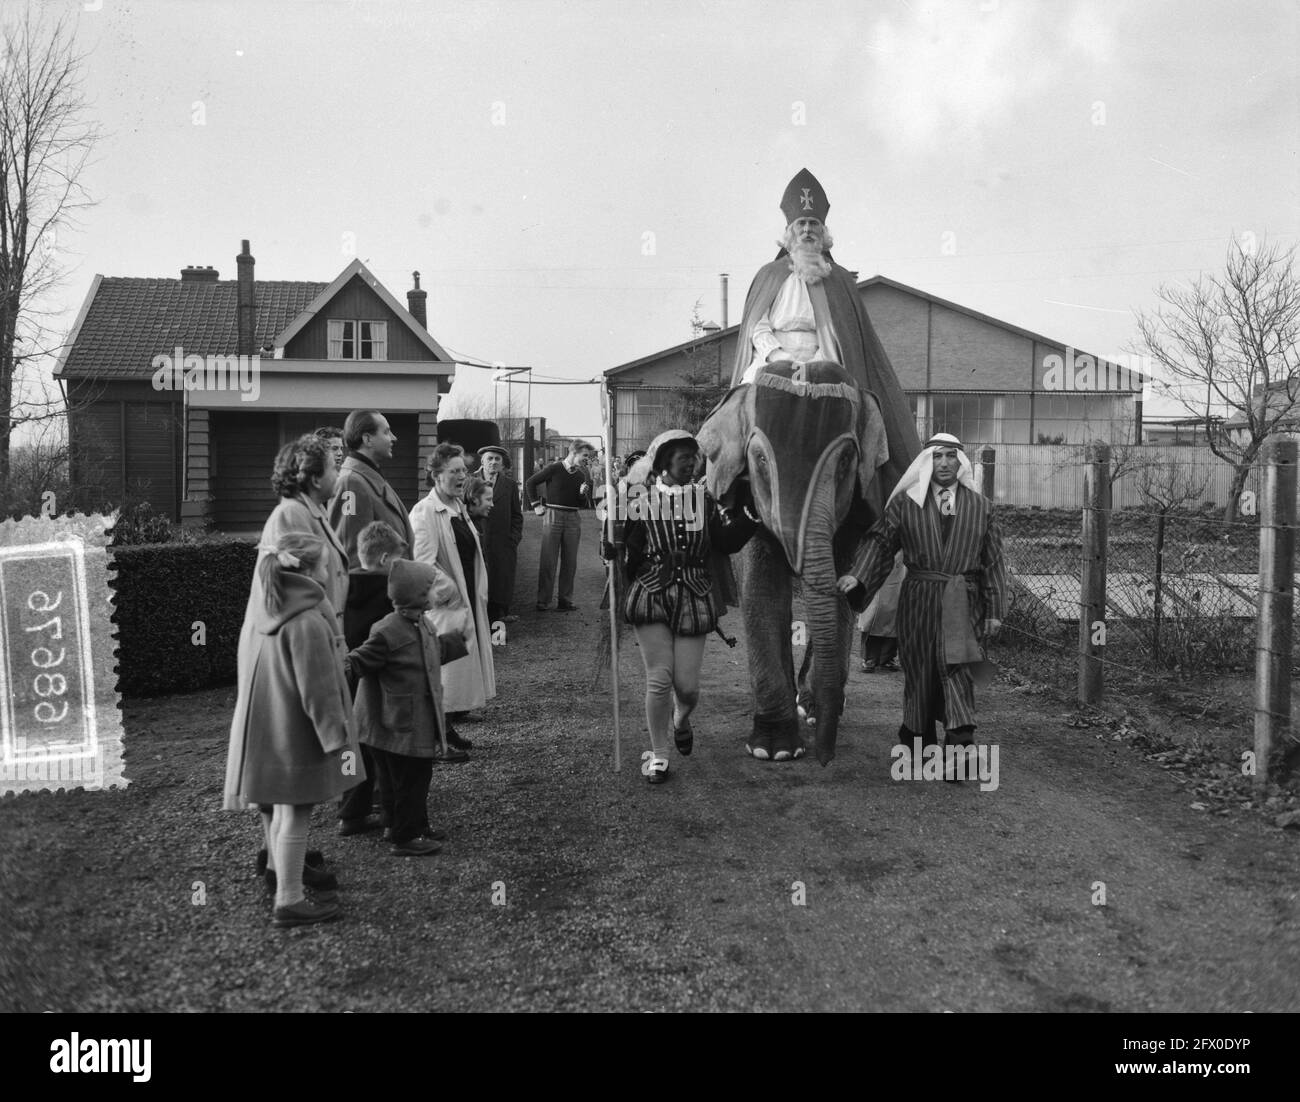 Saint Nicholas on elephant visiting Chemical Factory Naarden, December 1, 1954, OLIFANTS, The Netherlands, 20th century press agency photo, news to remember, documentary, historic photography 1945-1990, visual stories, human history of the Twentieth Century, capturing moments in time Stock Photo